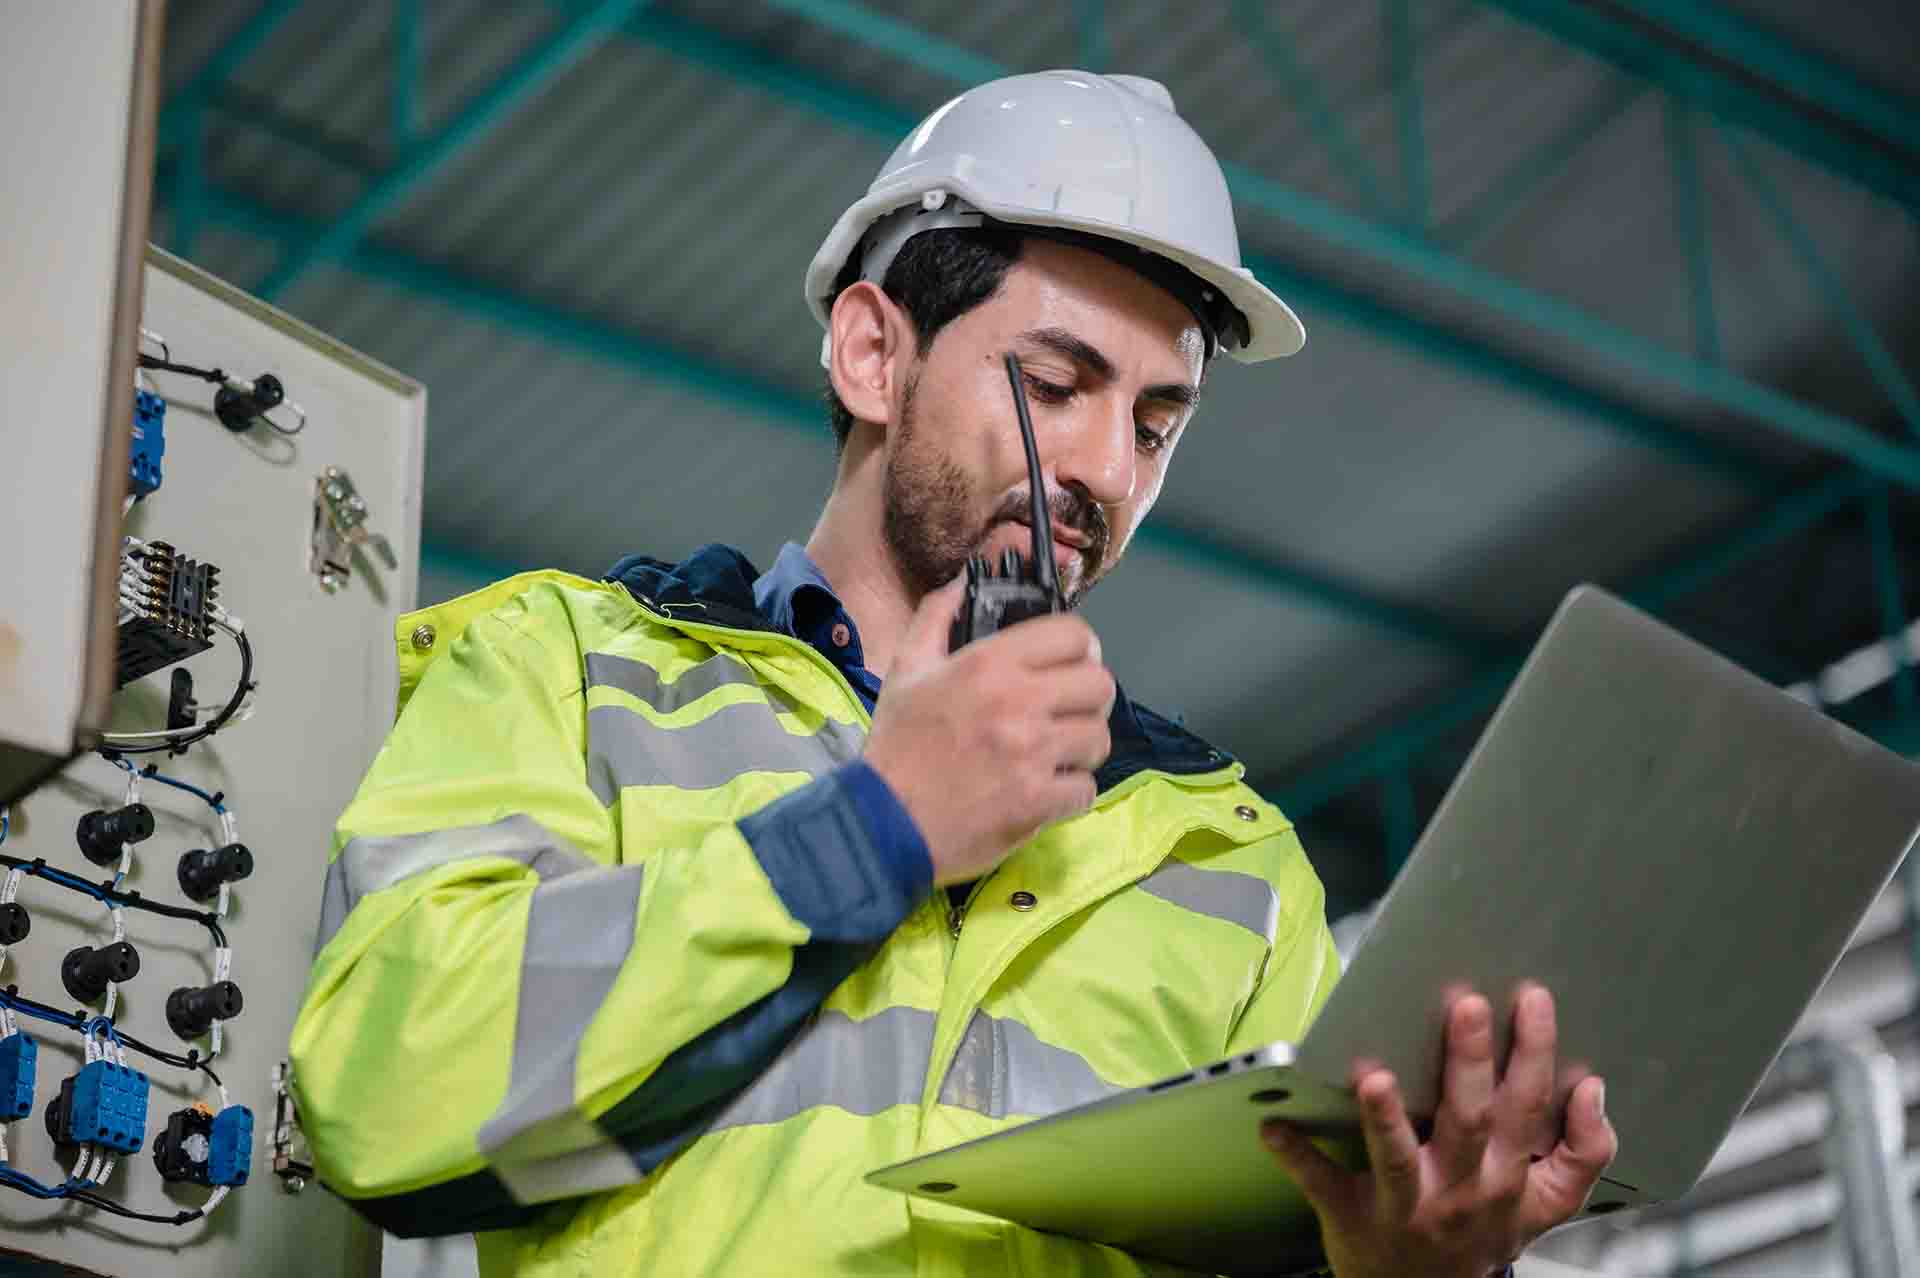 A man wearing a hardhat and high visibility jacket looking at a laptop and speaking on a walkie talkie.